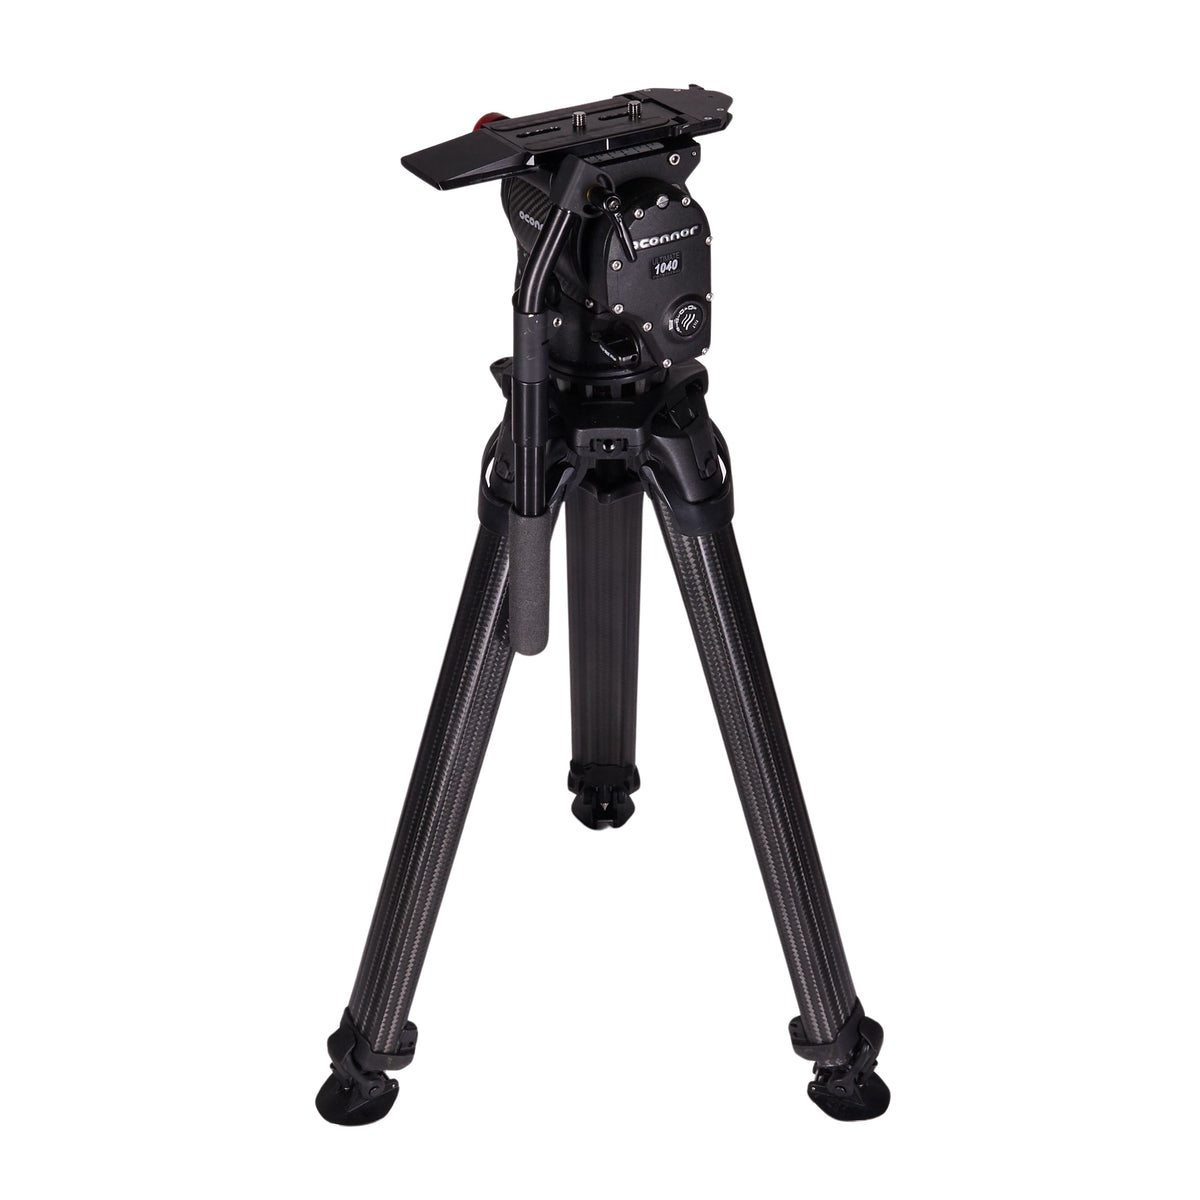 ACC3505 O&#39;Connor 1040 Fluid Head and flowtech 100 Tripod System with Handle and Case_000731.JPG